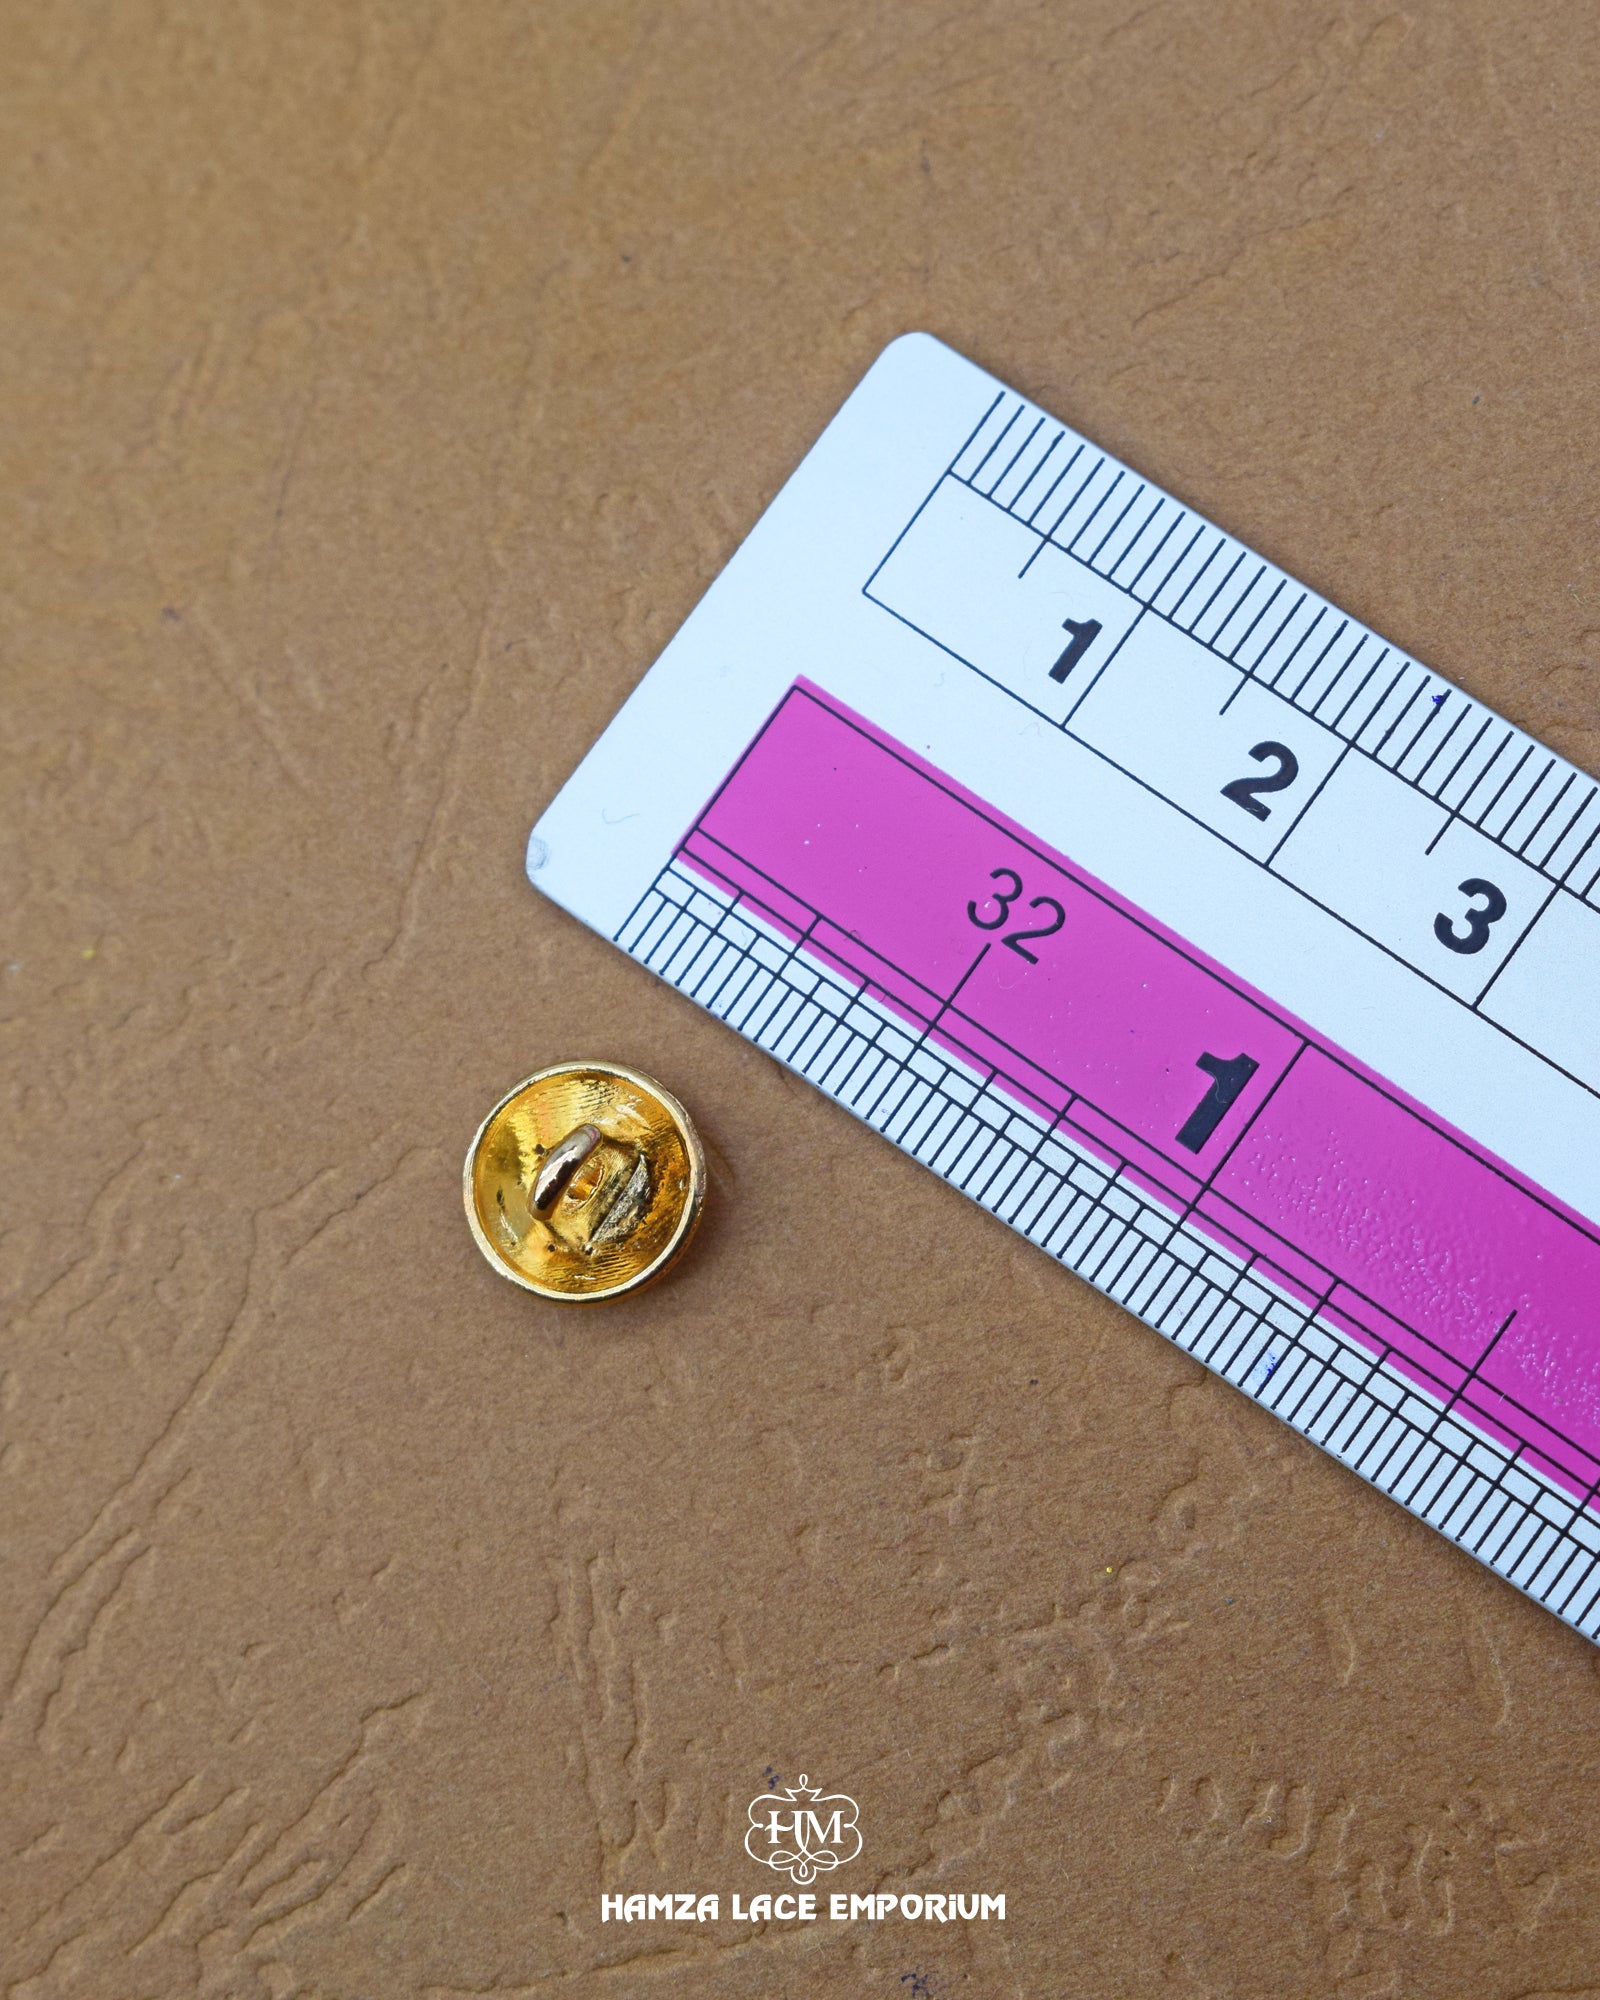 The size of the 'Golden Metal Button MB740' is measured by using a ruler